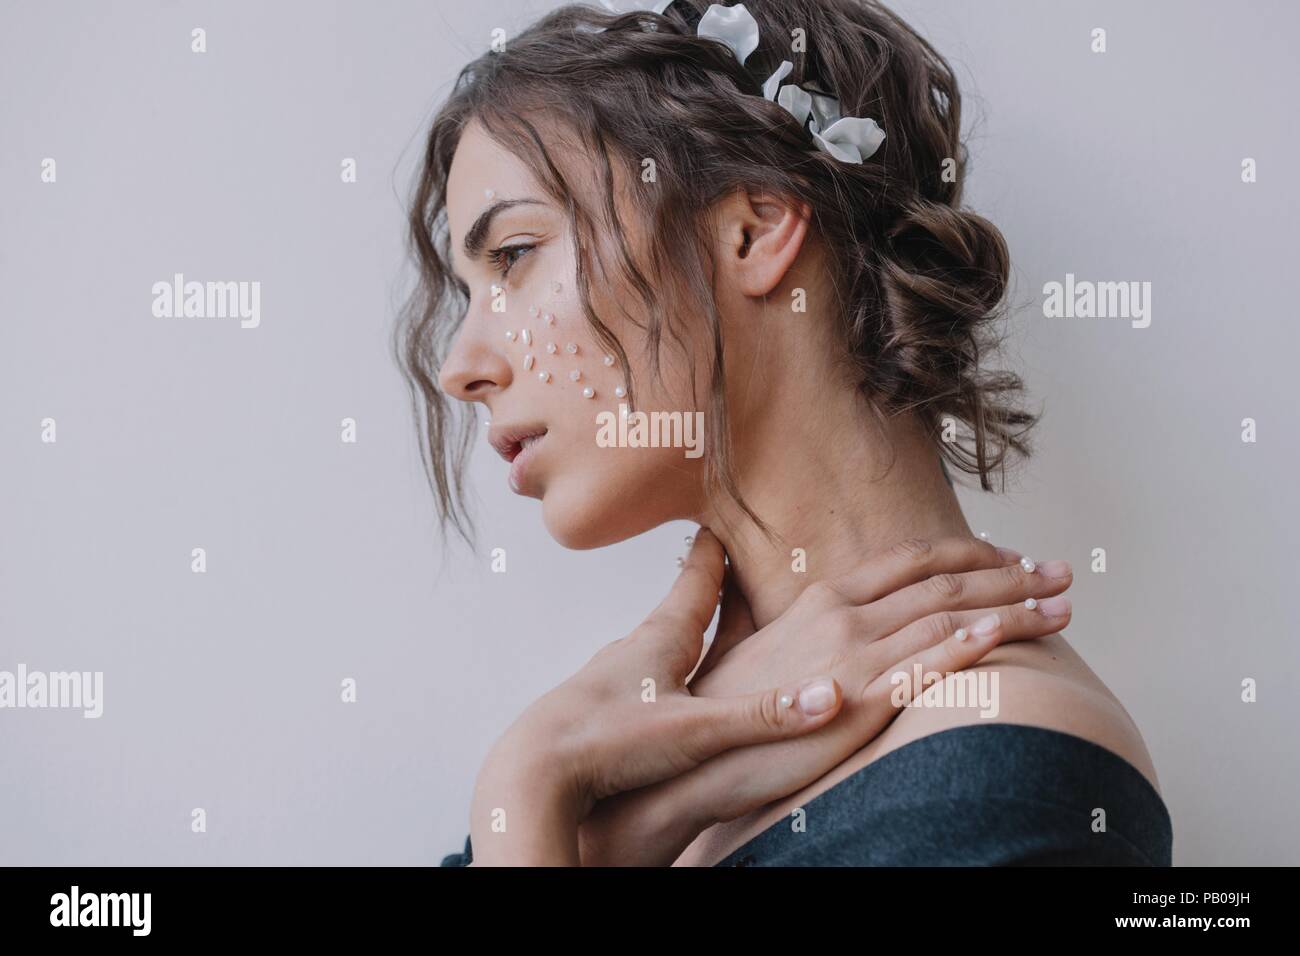 Portrait of a woman with pearls on her face and fingers Stock Photo